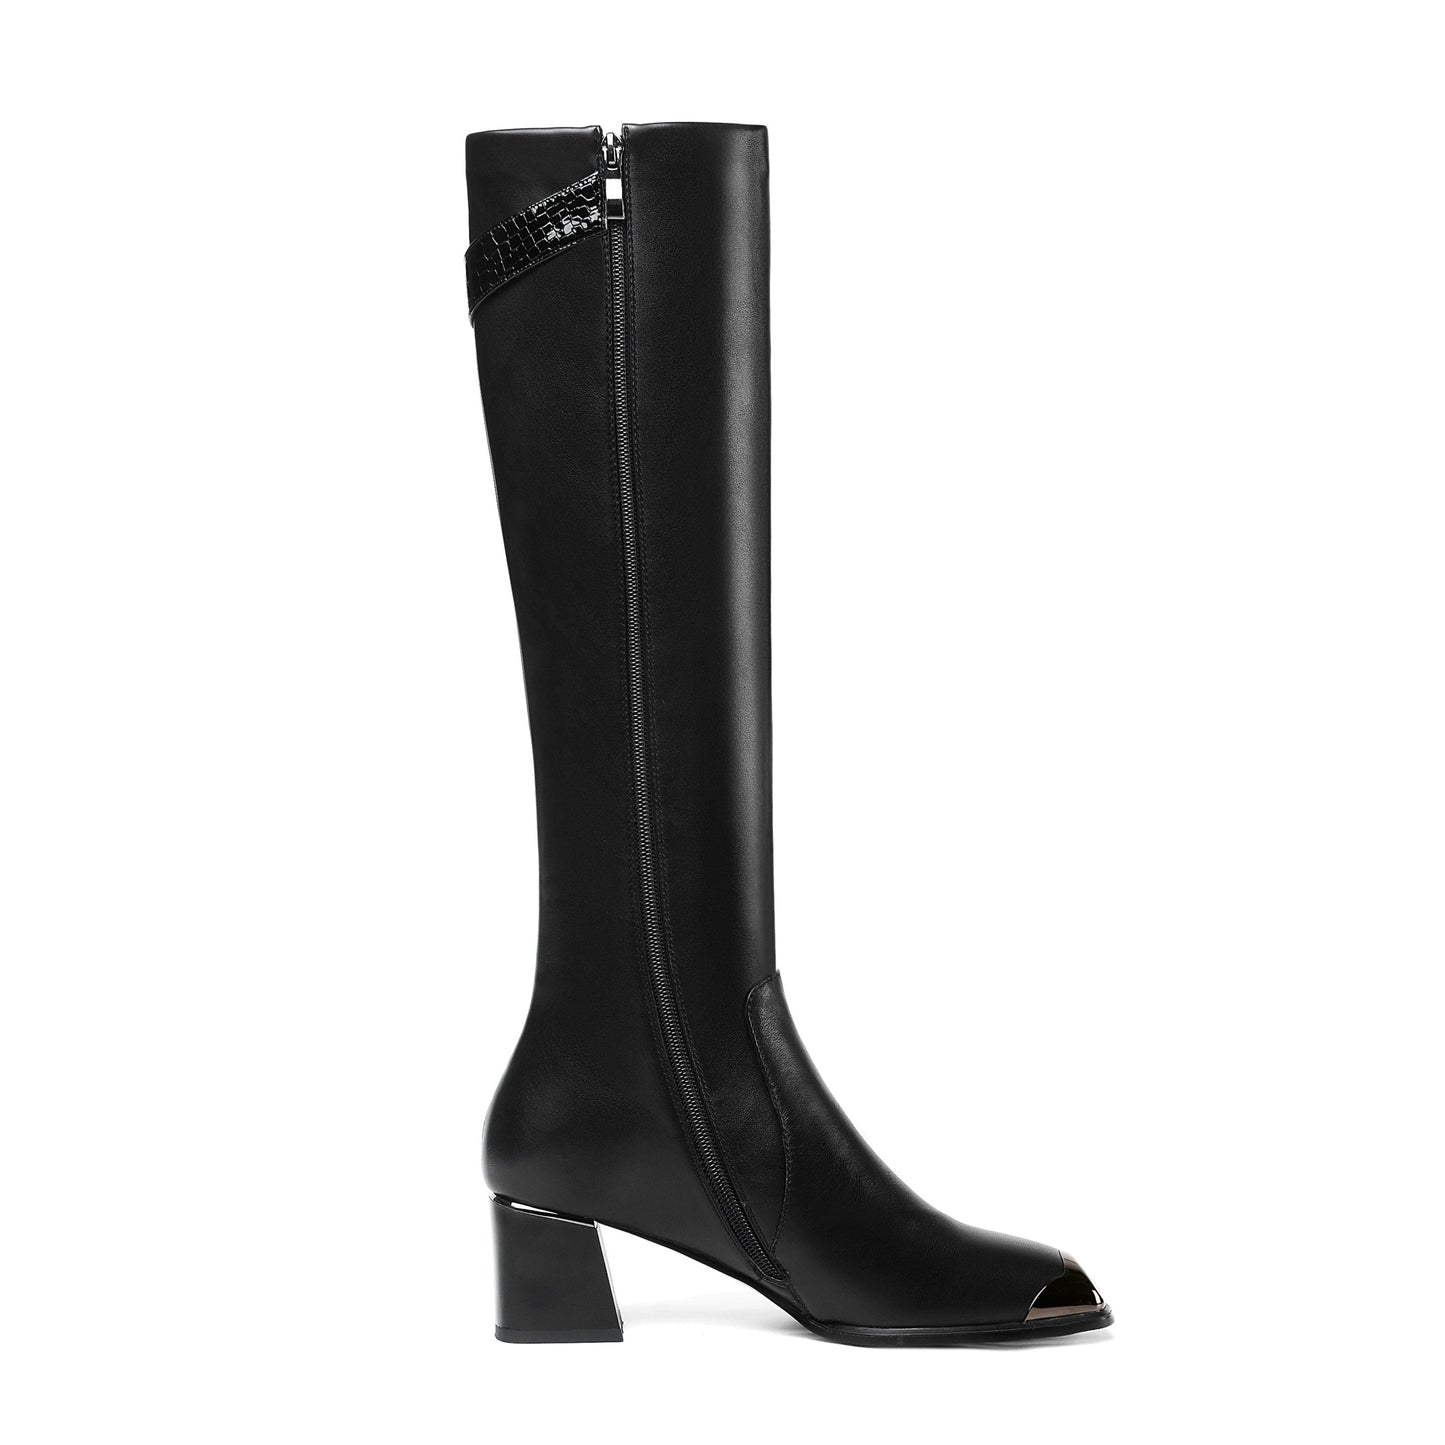 TinaCus Handmade Women's Genuine Leather Square Toe Mid Chunky Heel Side Zip Up Black Knee High Boots with Buckle Decor